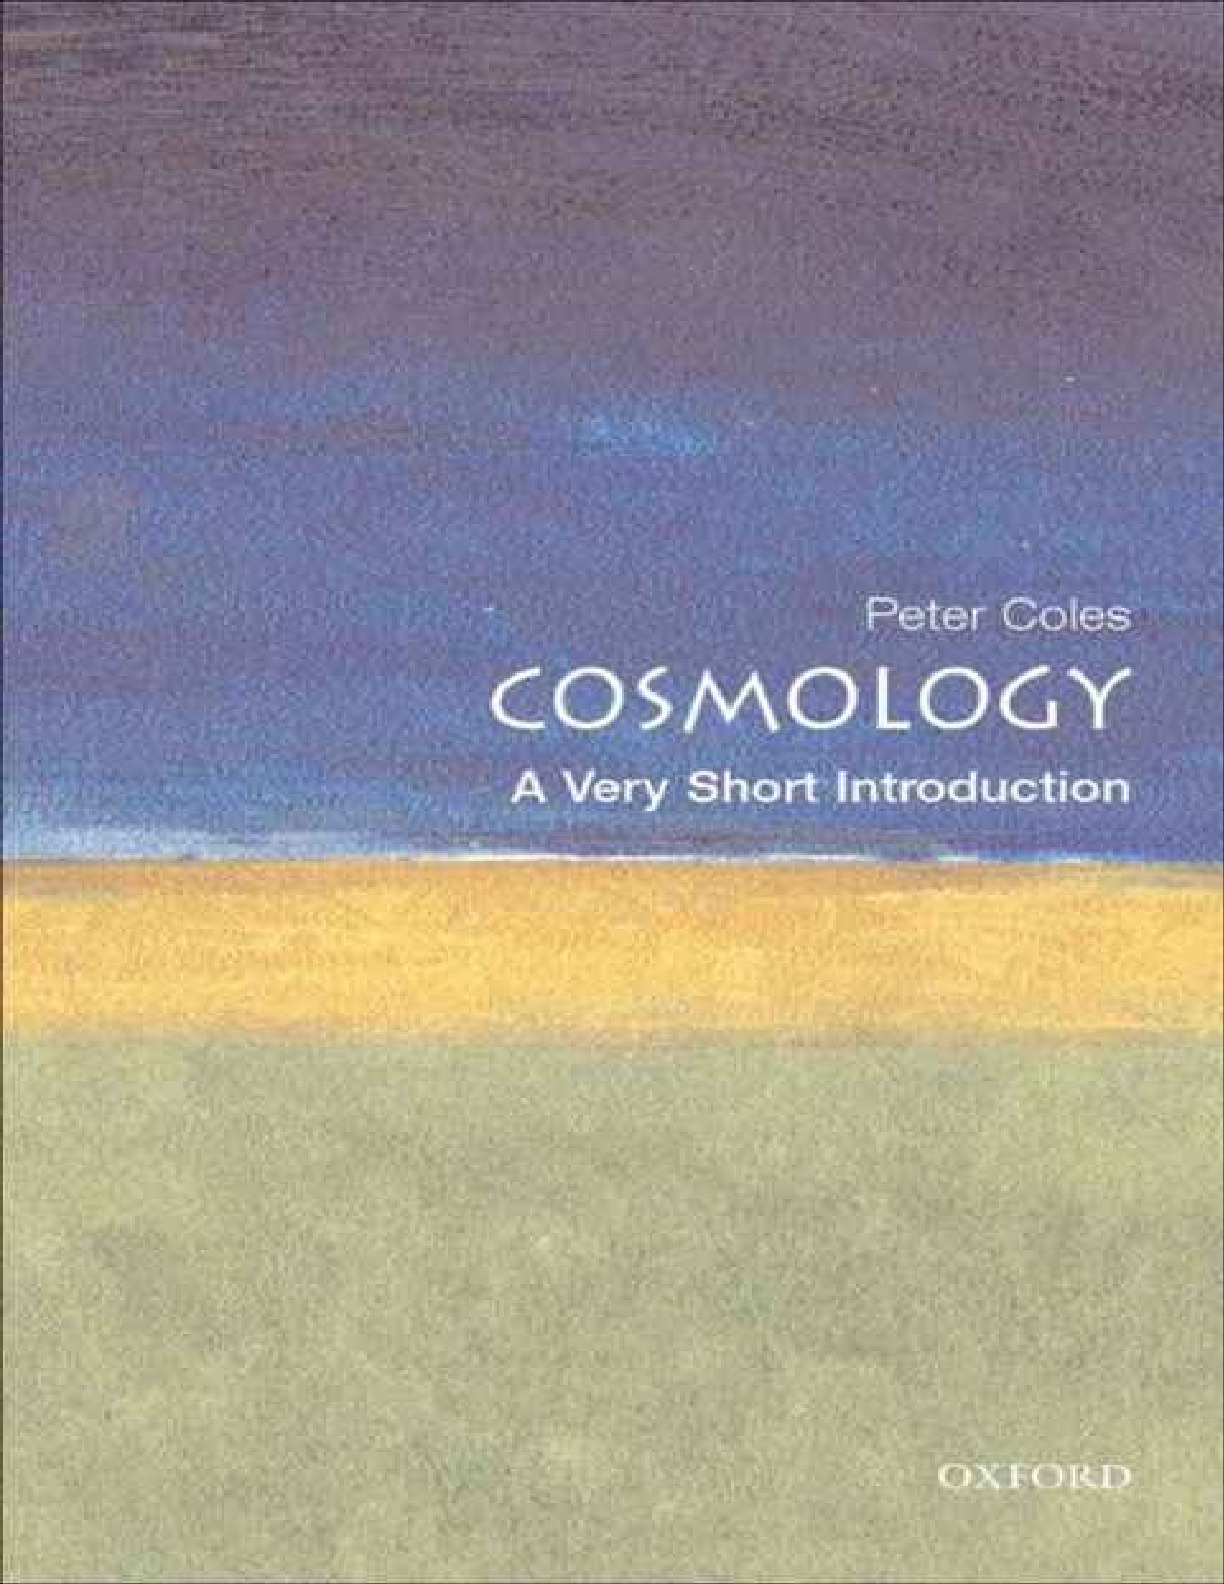 Cosmology_ A Very Short Introduction ( PDFDrive.com )